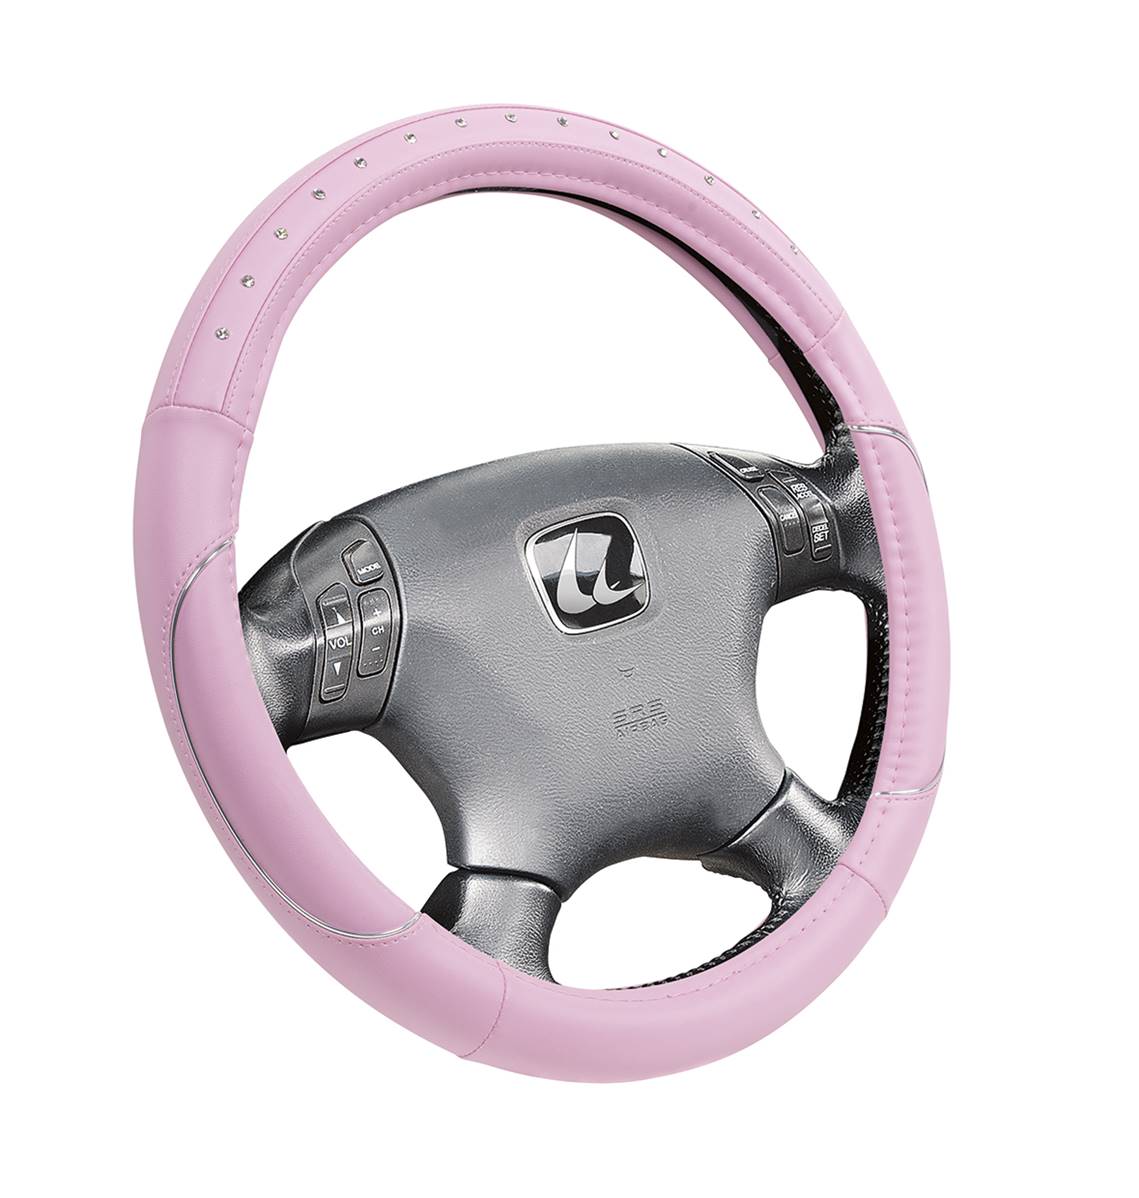 Couvre volant de voiture style pinky rose strass diamant 37 - 39 cm